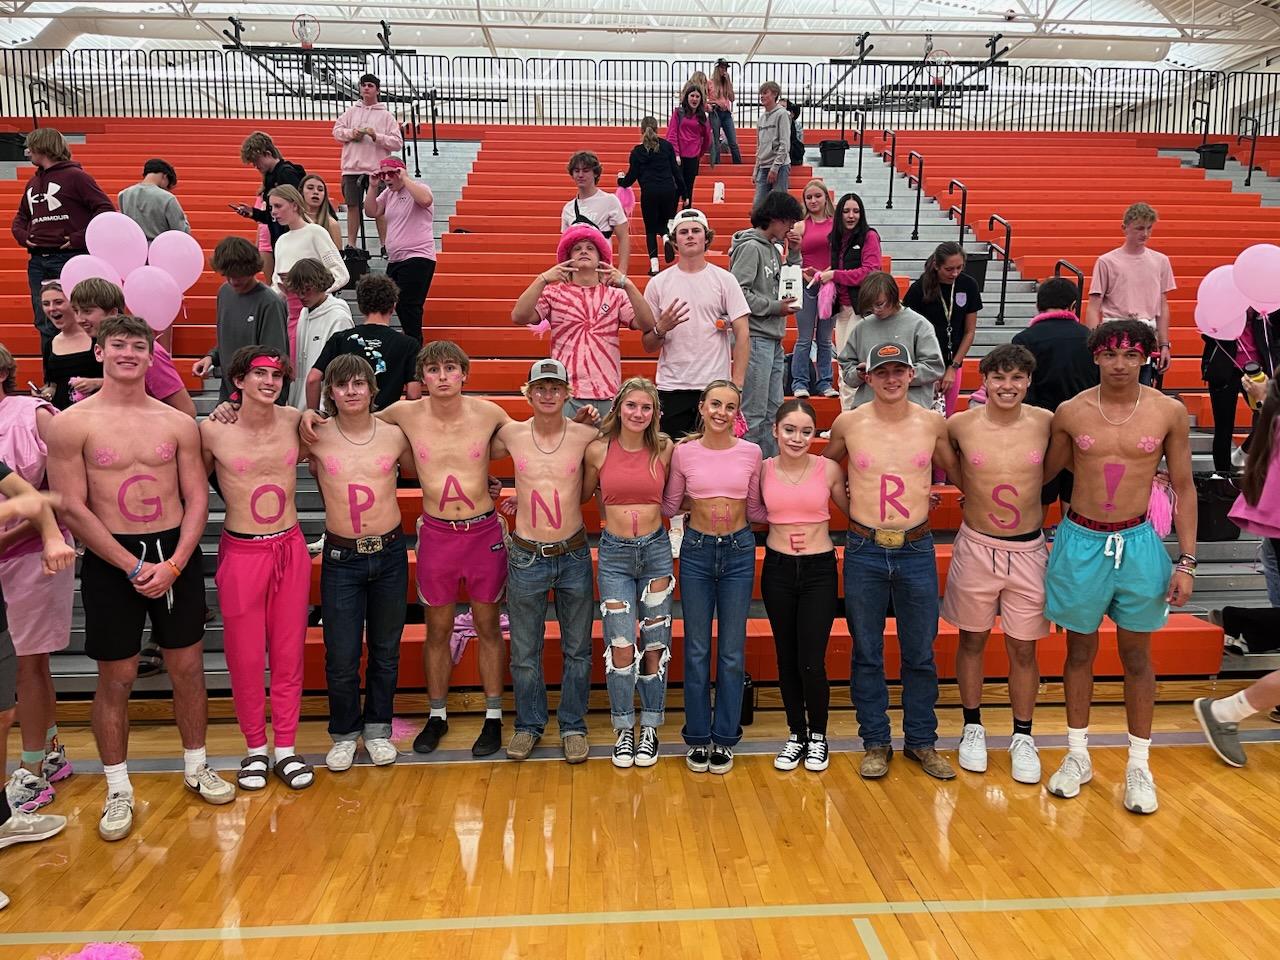 After the volleyball game, the painted-up students smile for a picture. Photo courtesy of Anna Smith.